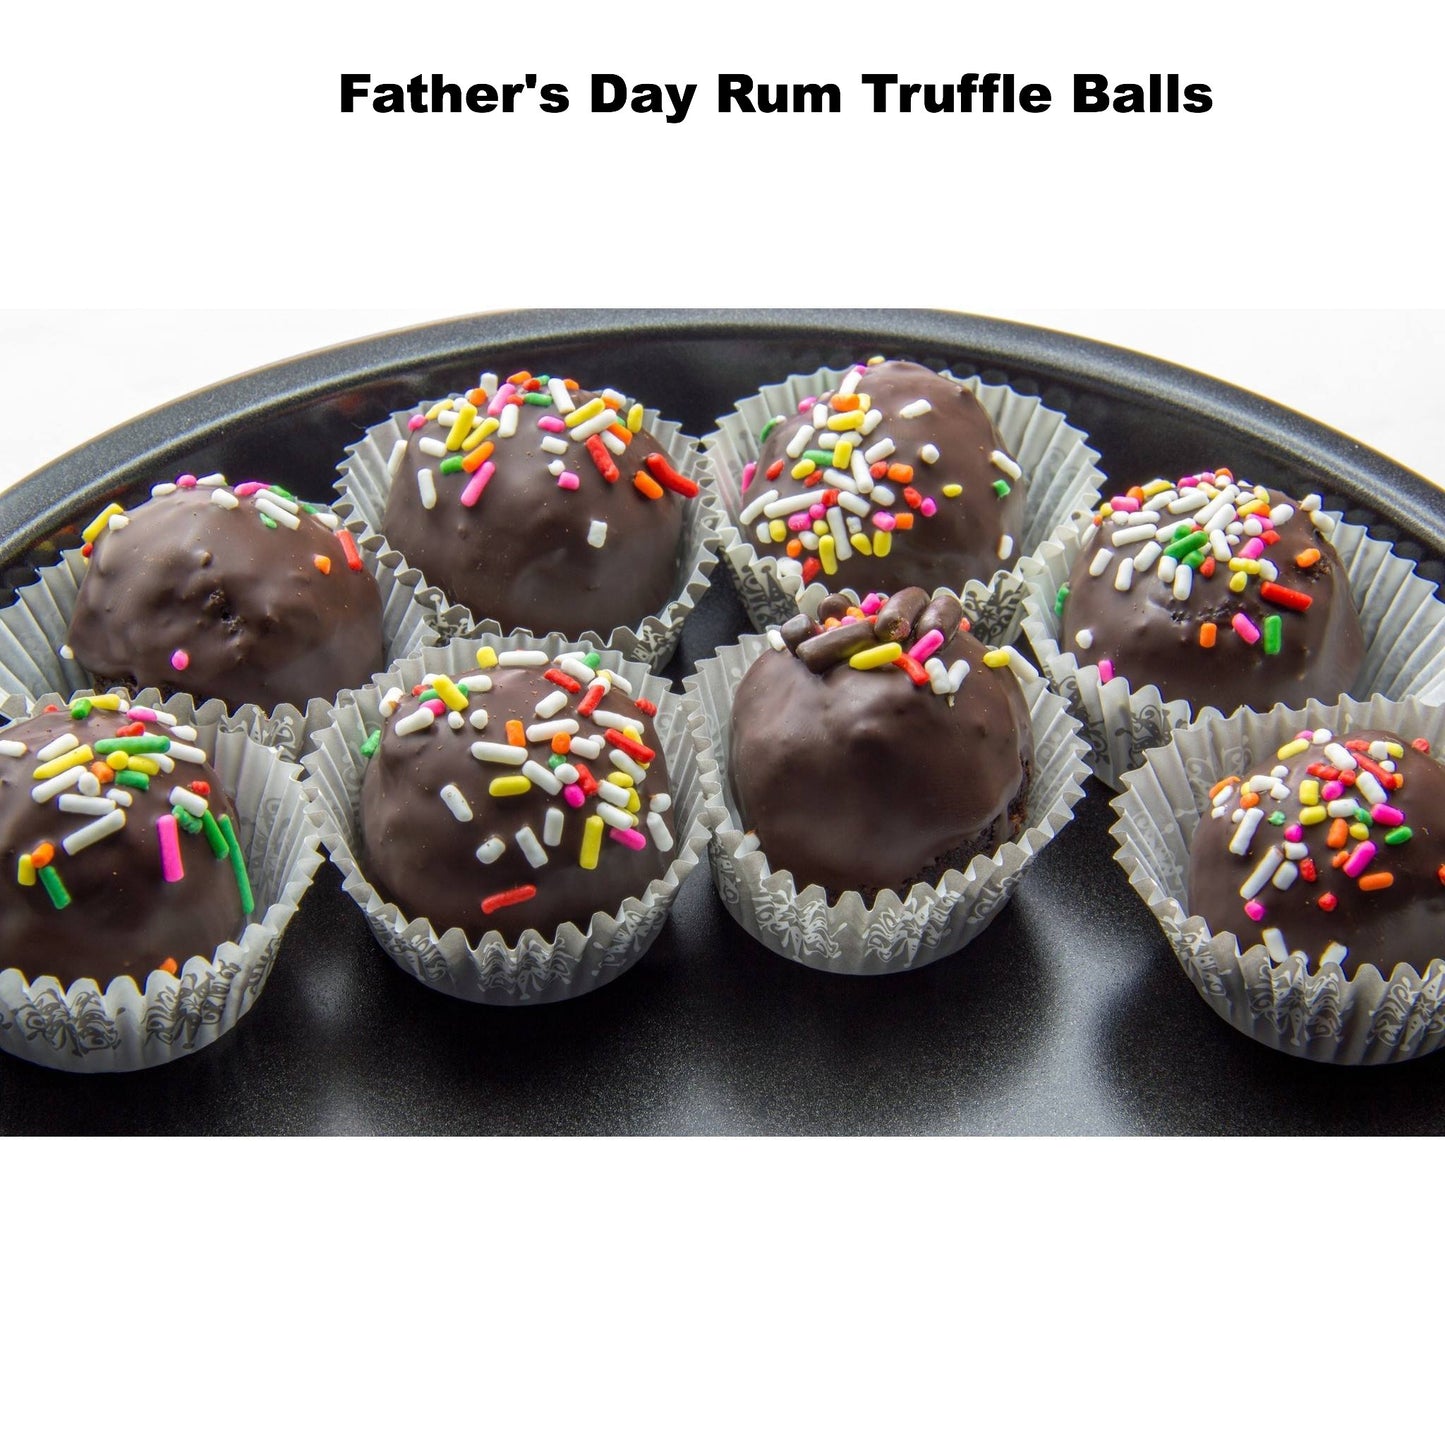 Buy Chocolate Rum Truffle Cake Pop Balls For Father's Day - Cake Pops Parties